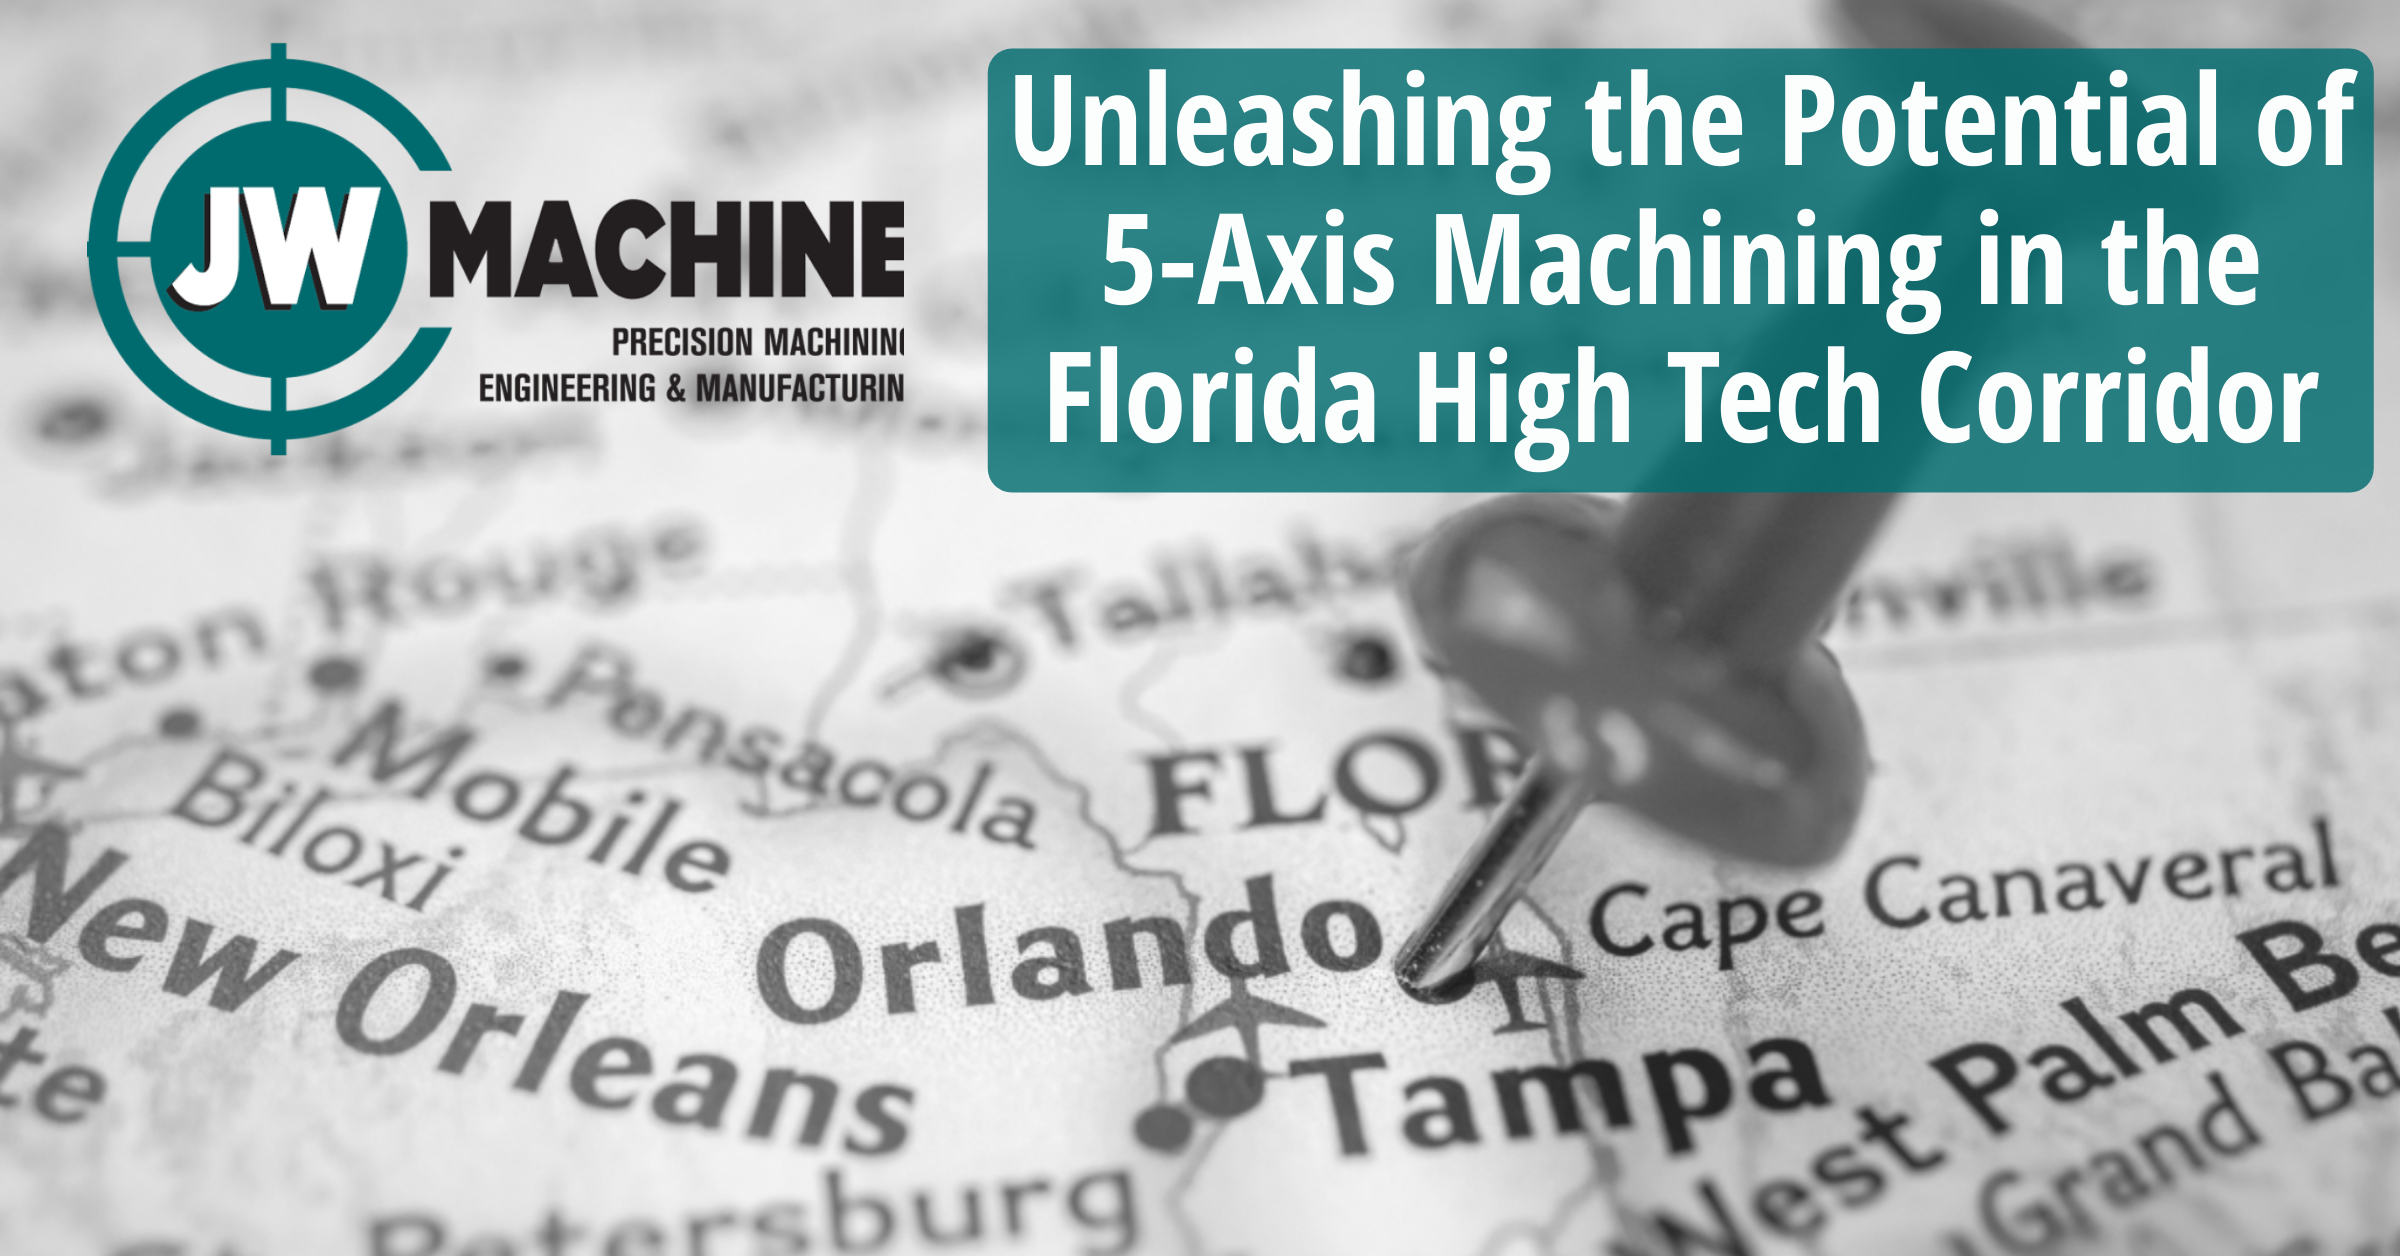 Potential of 5-Axis Machining in the Florida High Tech Corridor